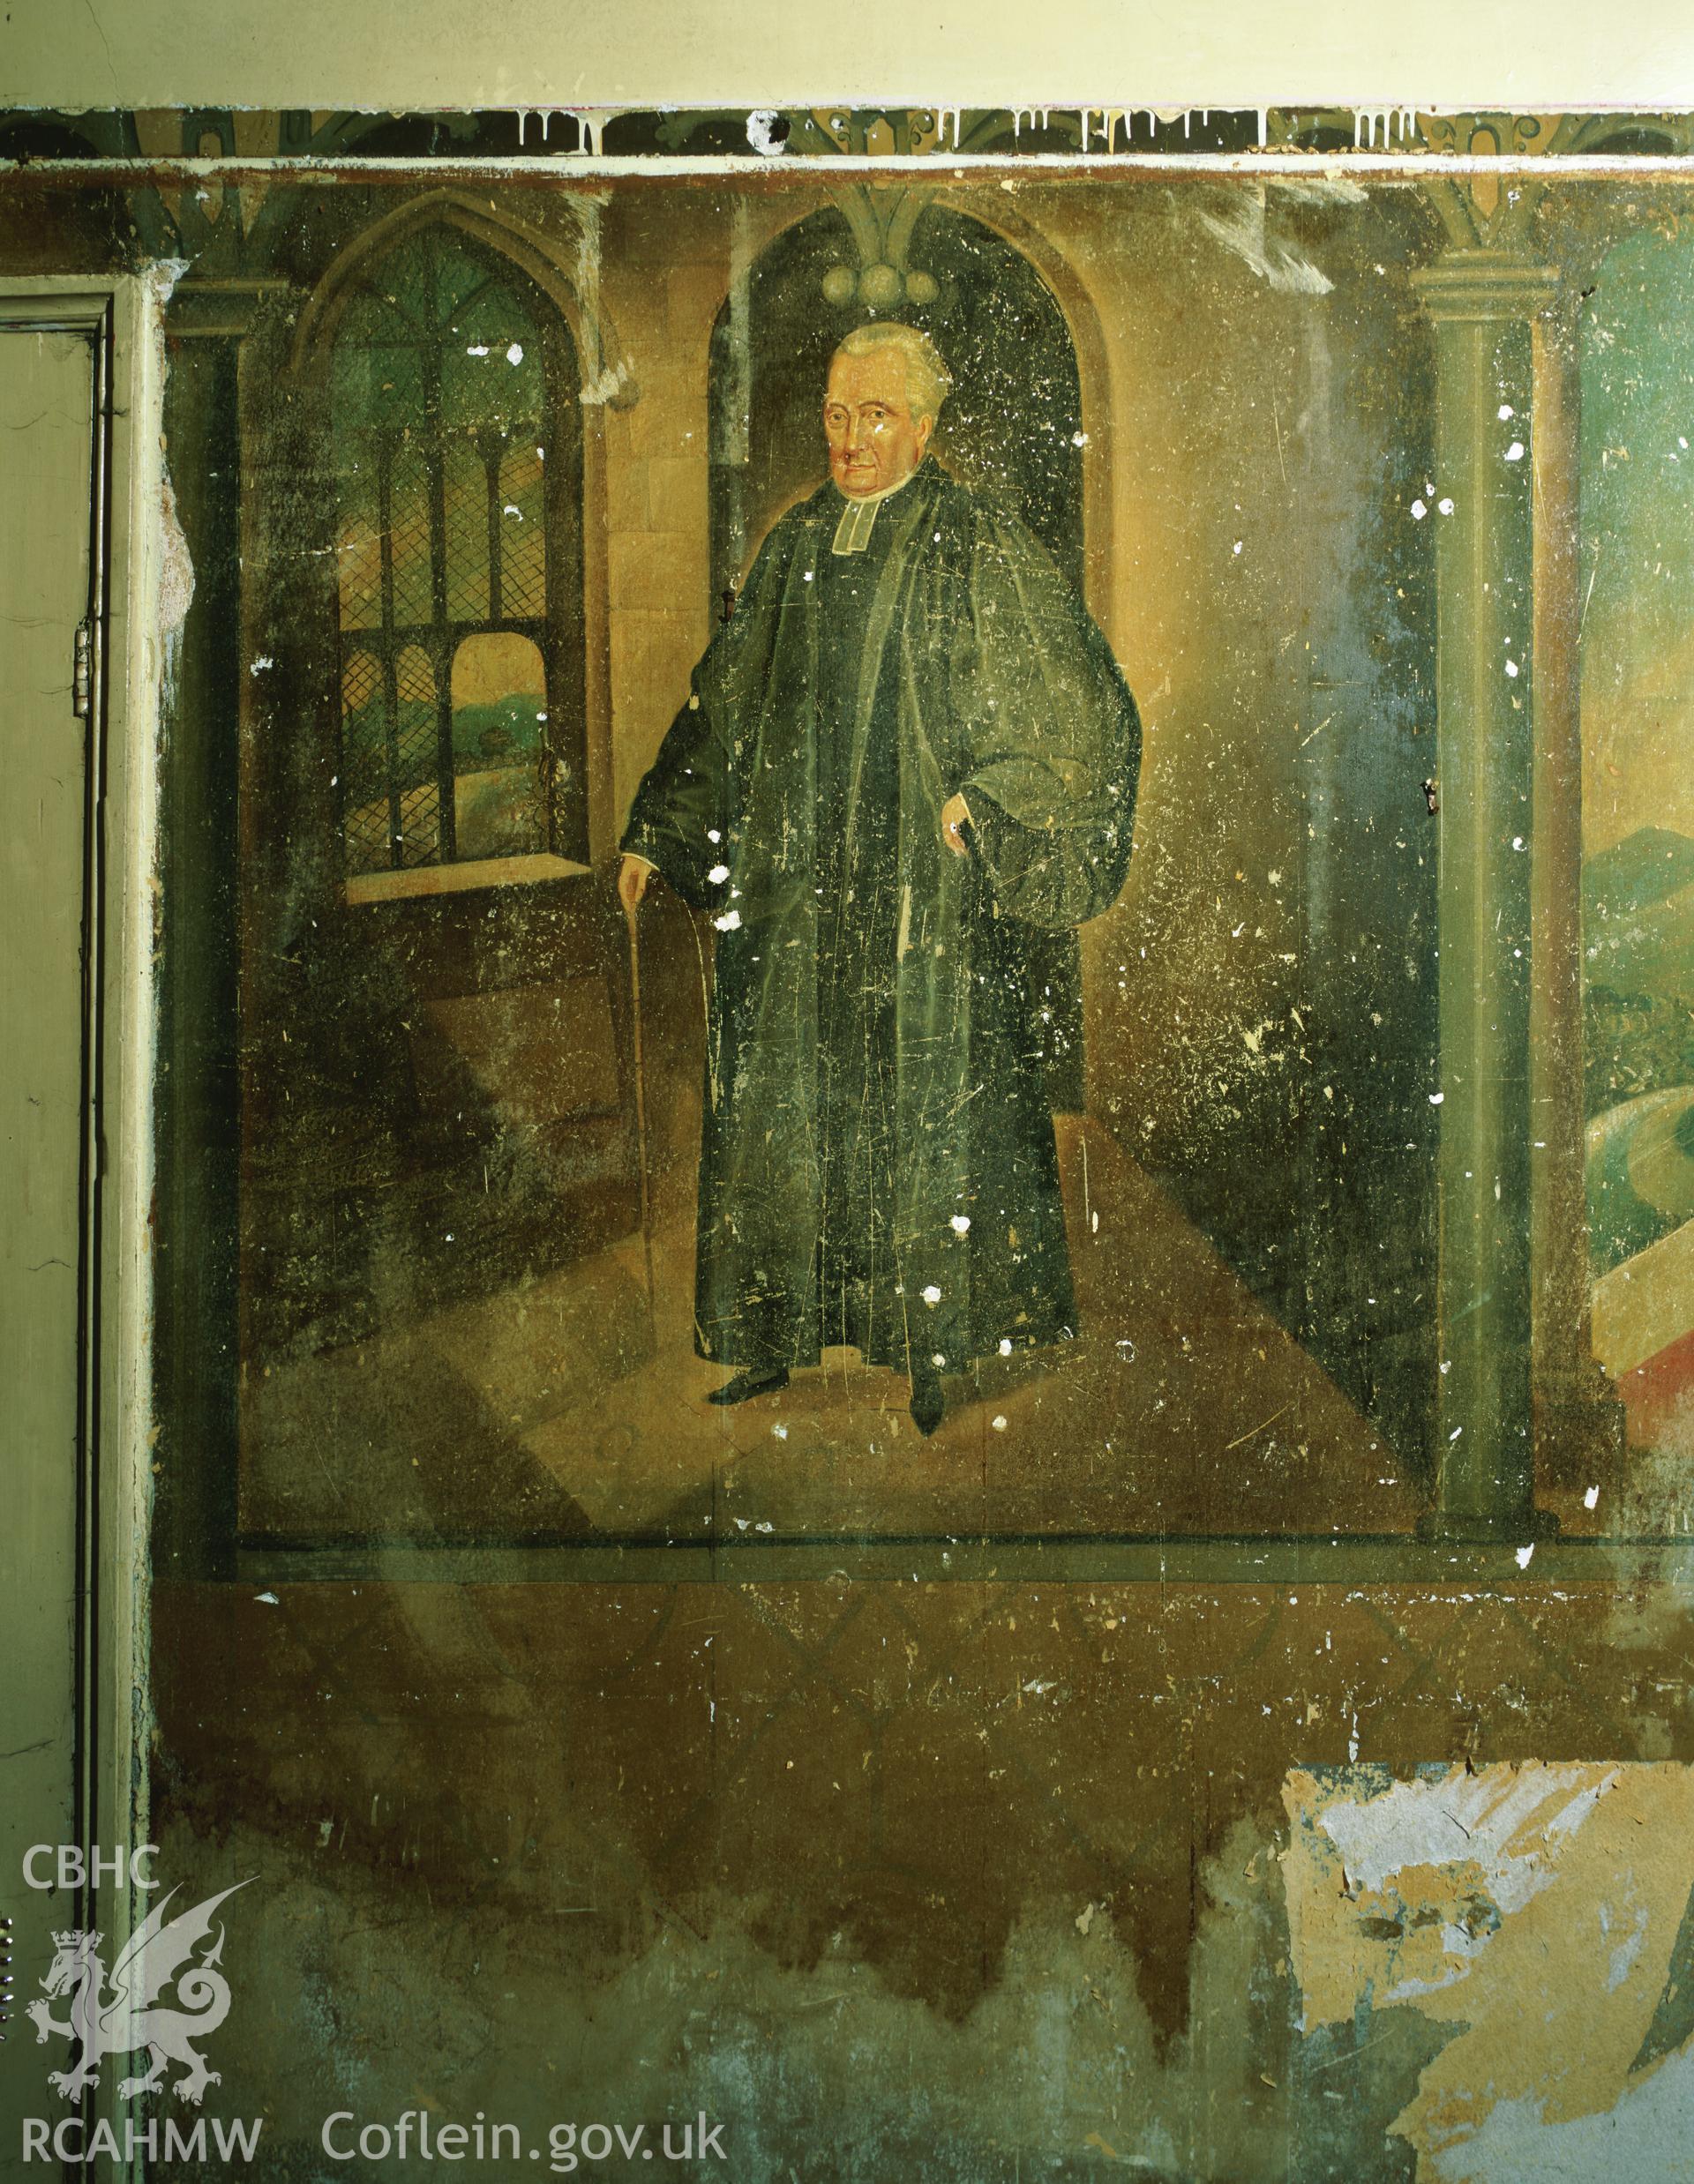 RCAHMW colour transparency showing clergyman wallpainting, at Elwy Bank, St Asaph, photographed by Iain Wright, November 2003.